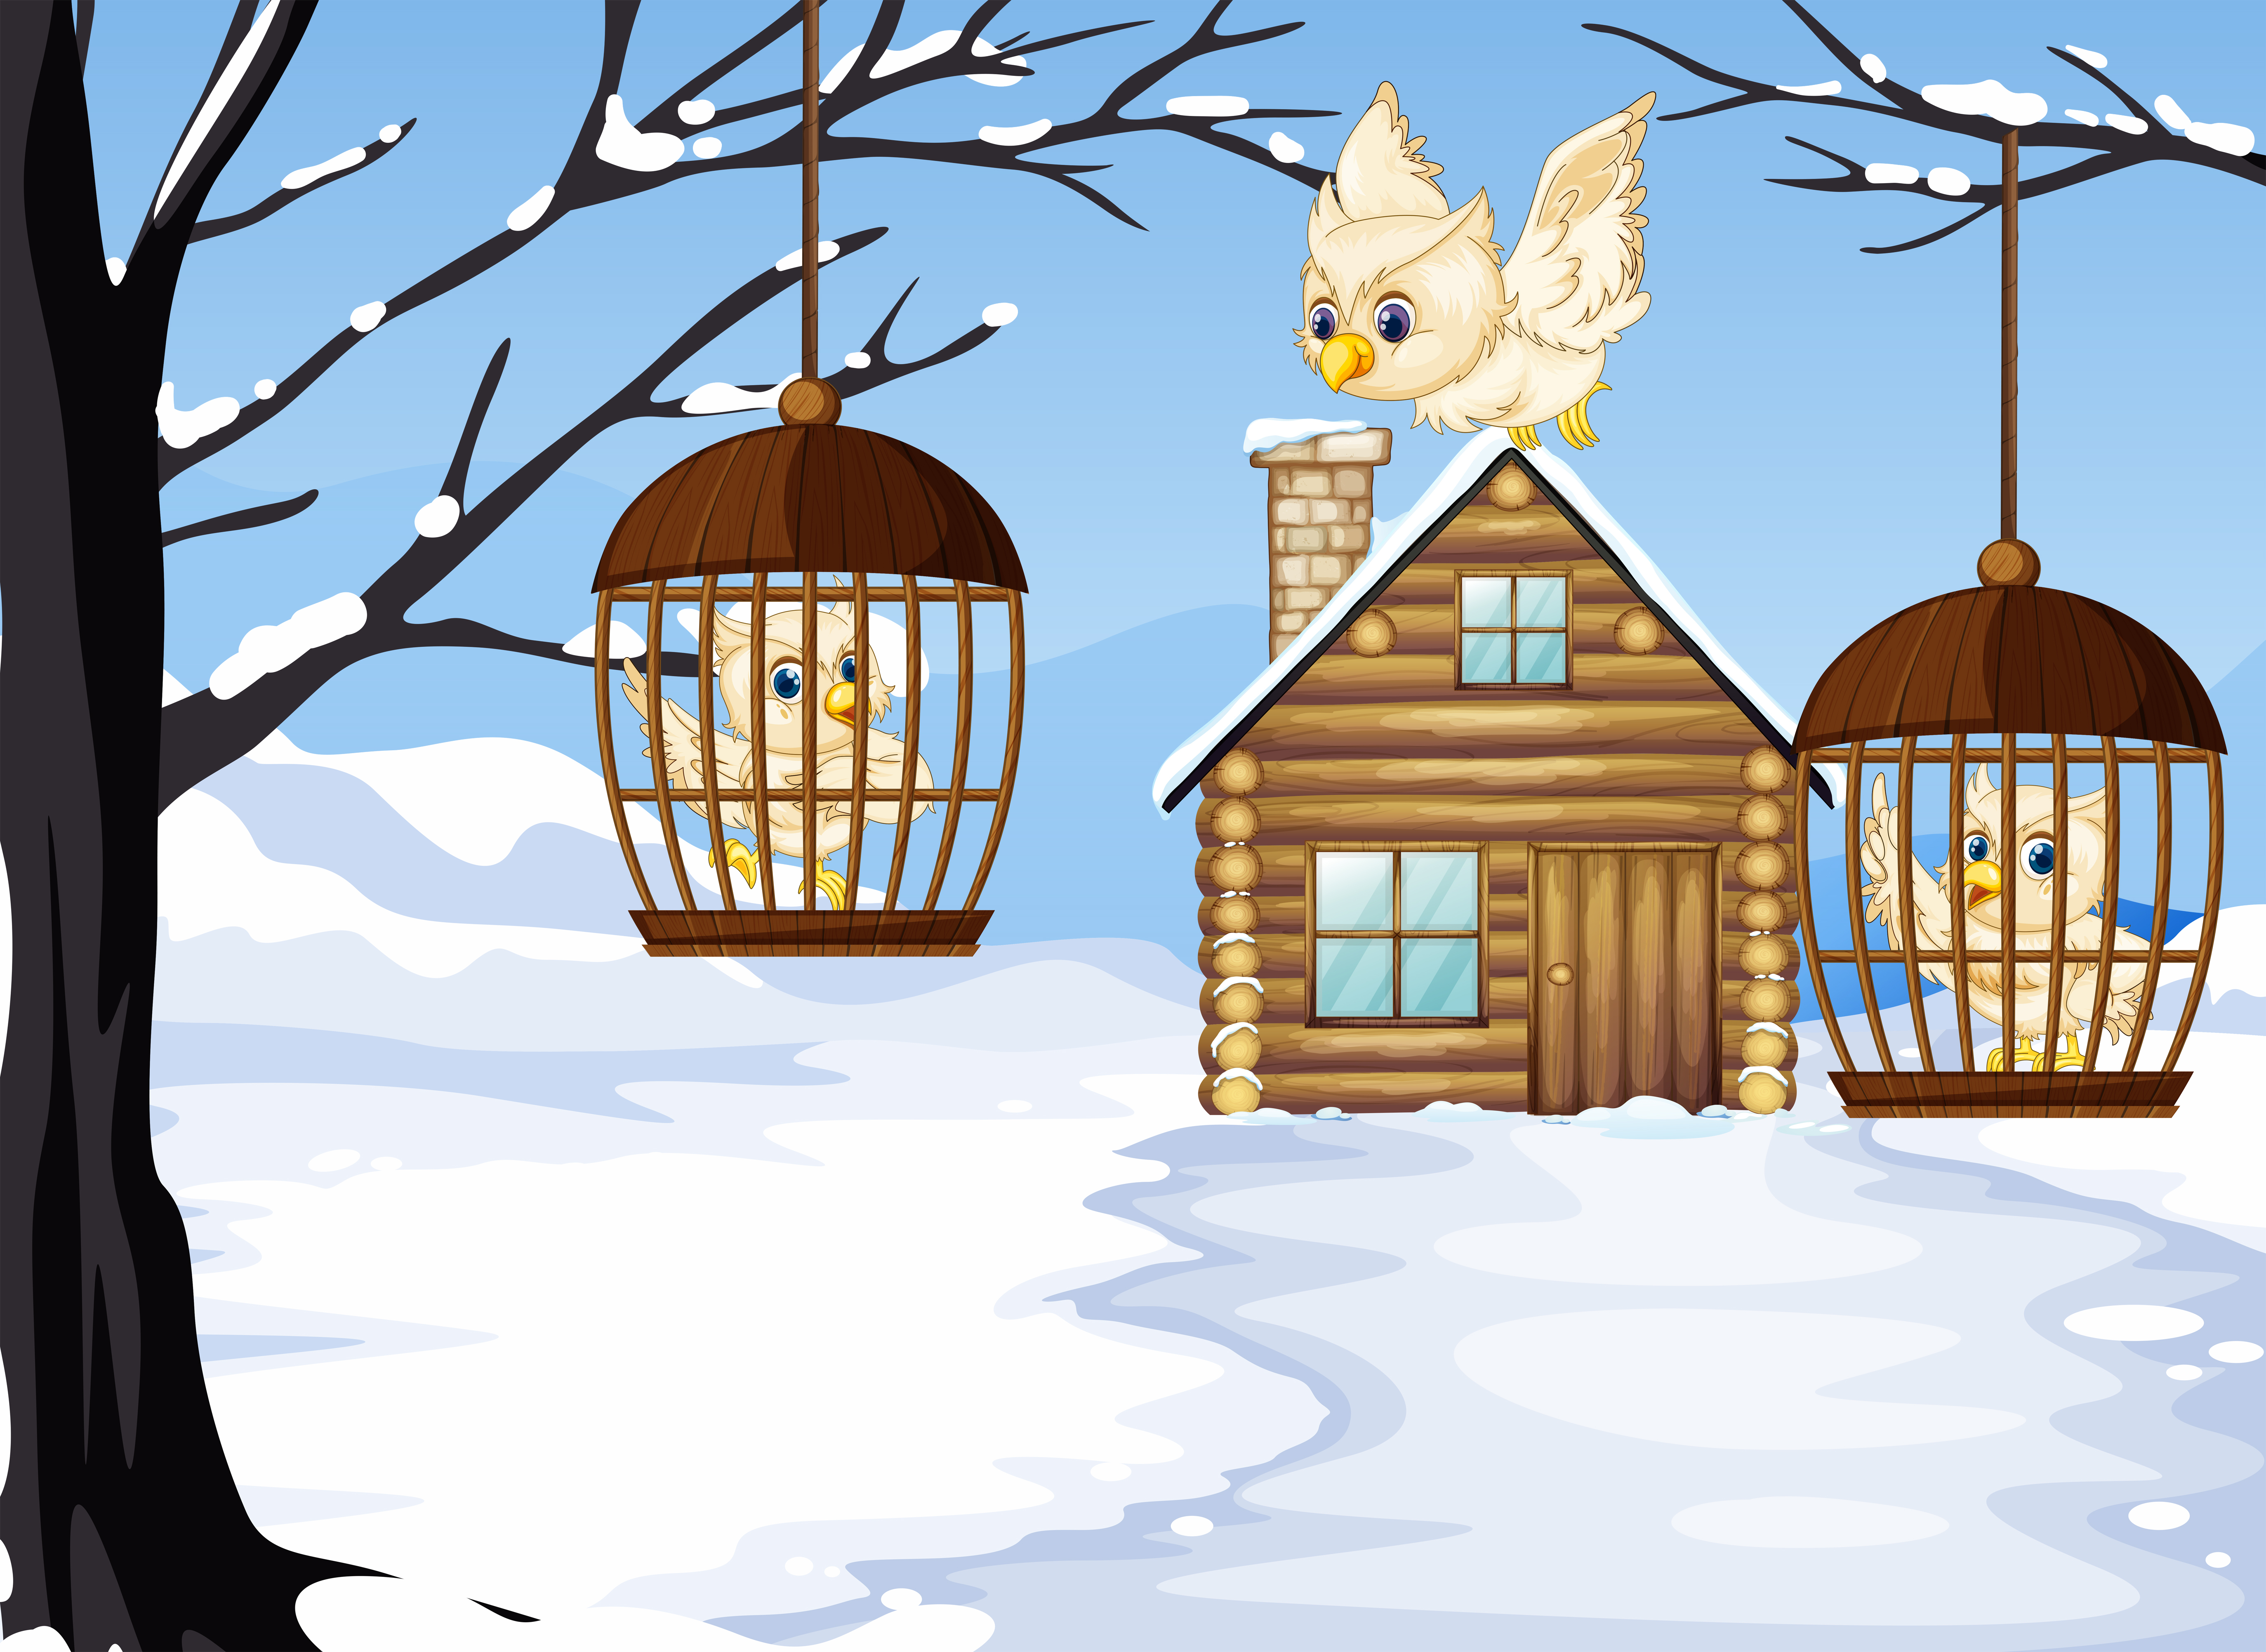 Download Winter scene with white owls in bird cages 519861 ...